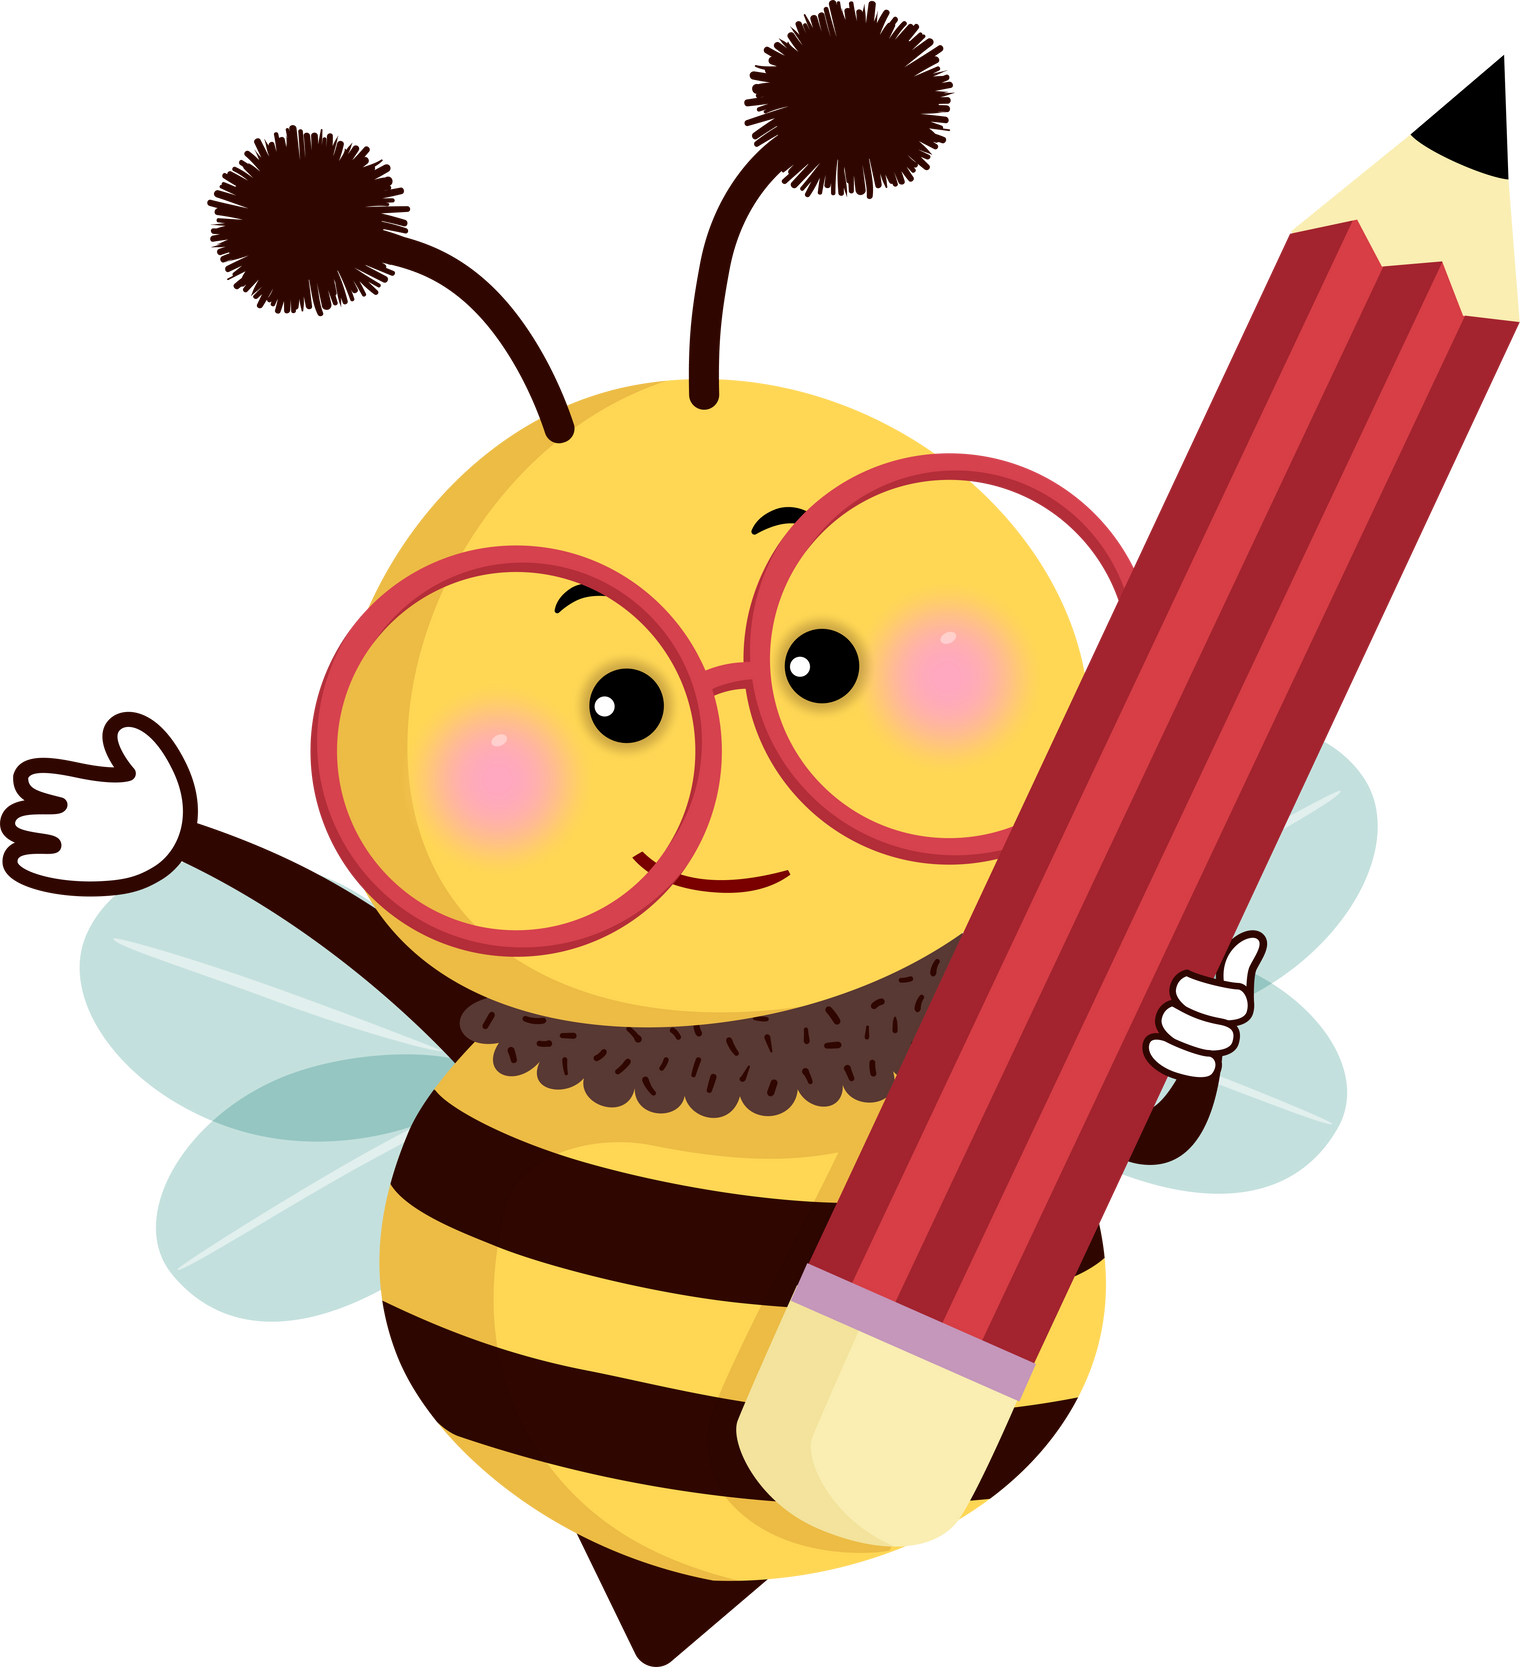 Bee Holding a Pencil